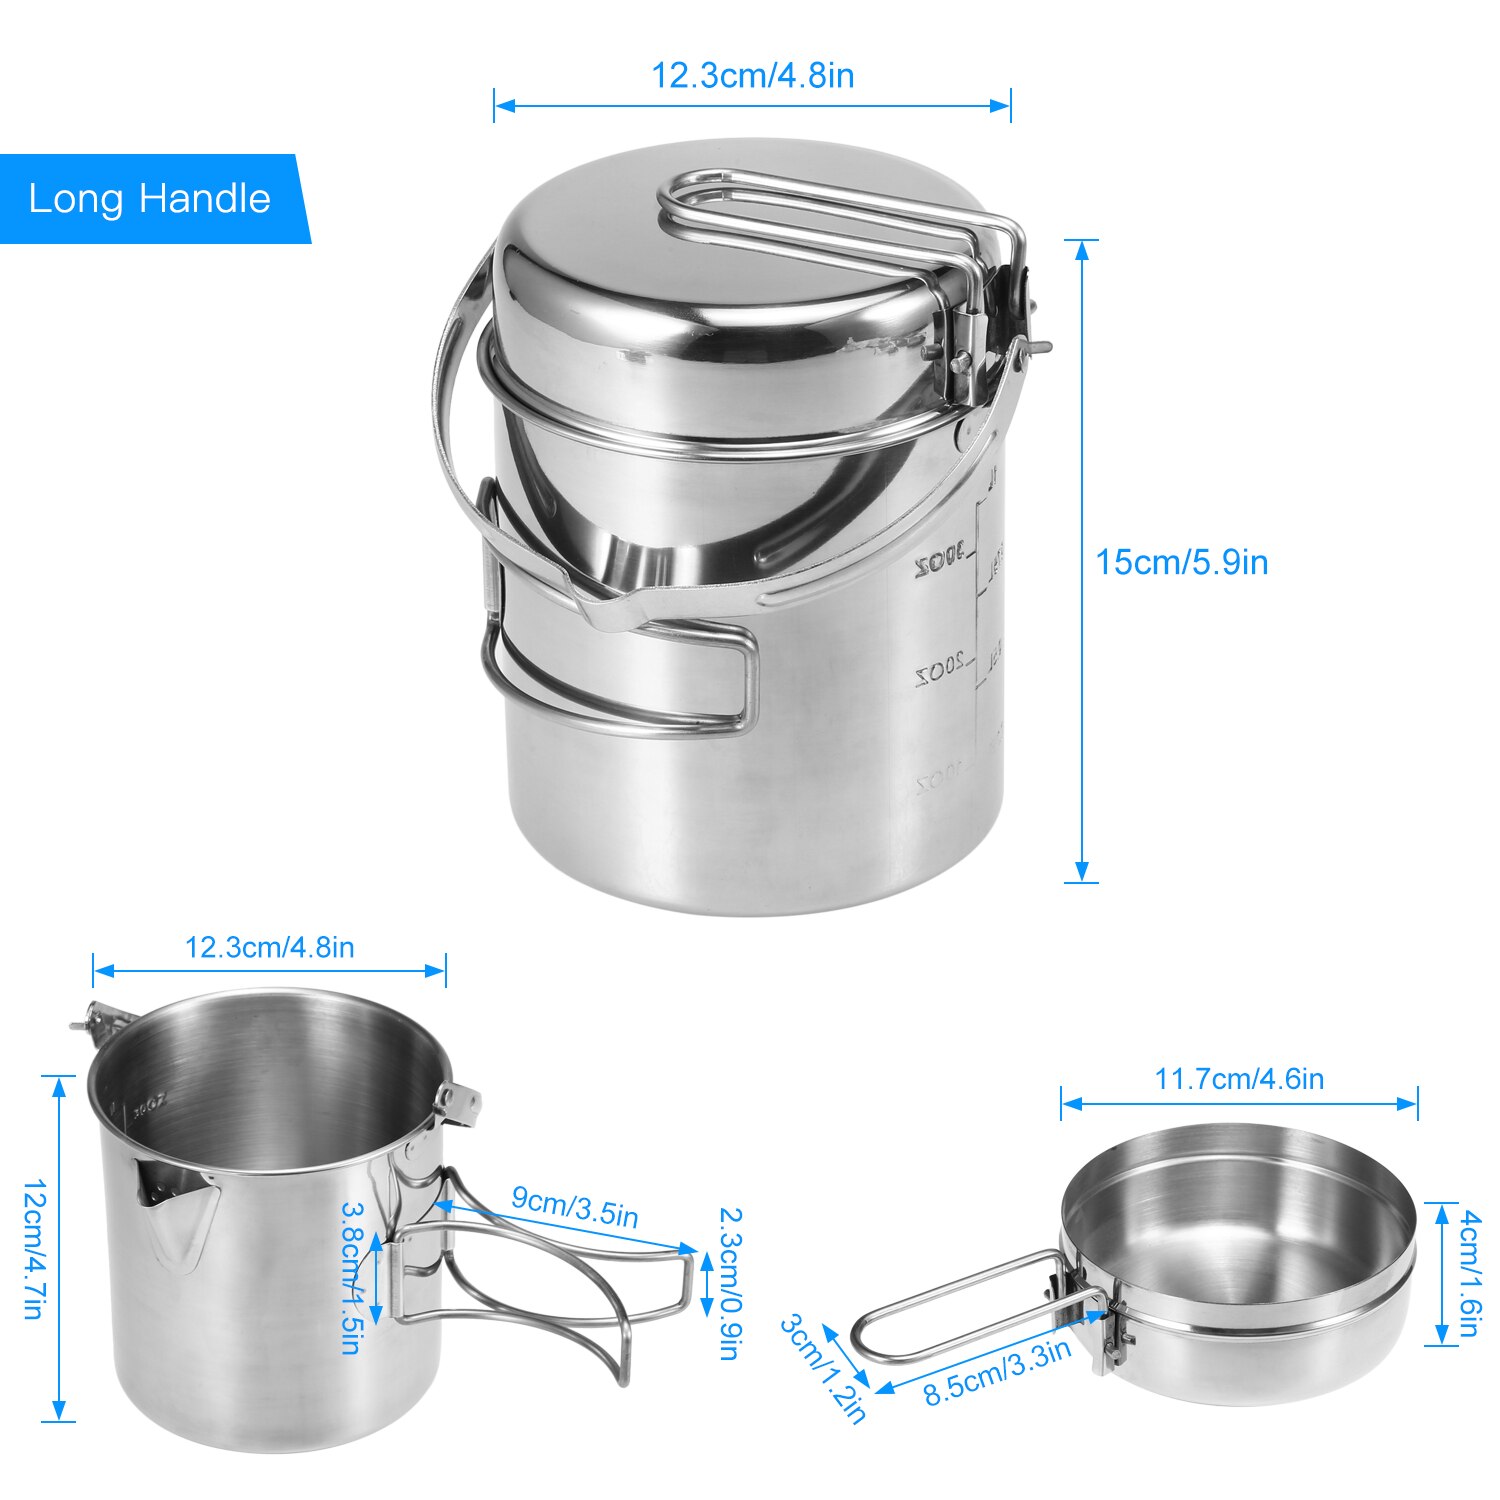 1L Kettle Stainless Steel Cooking Kettle Portable Outdoor Camping Backpacking Pot with Foldable Handle Camping Equipment